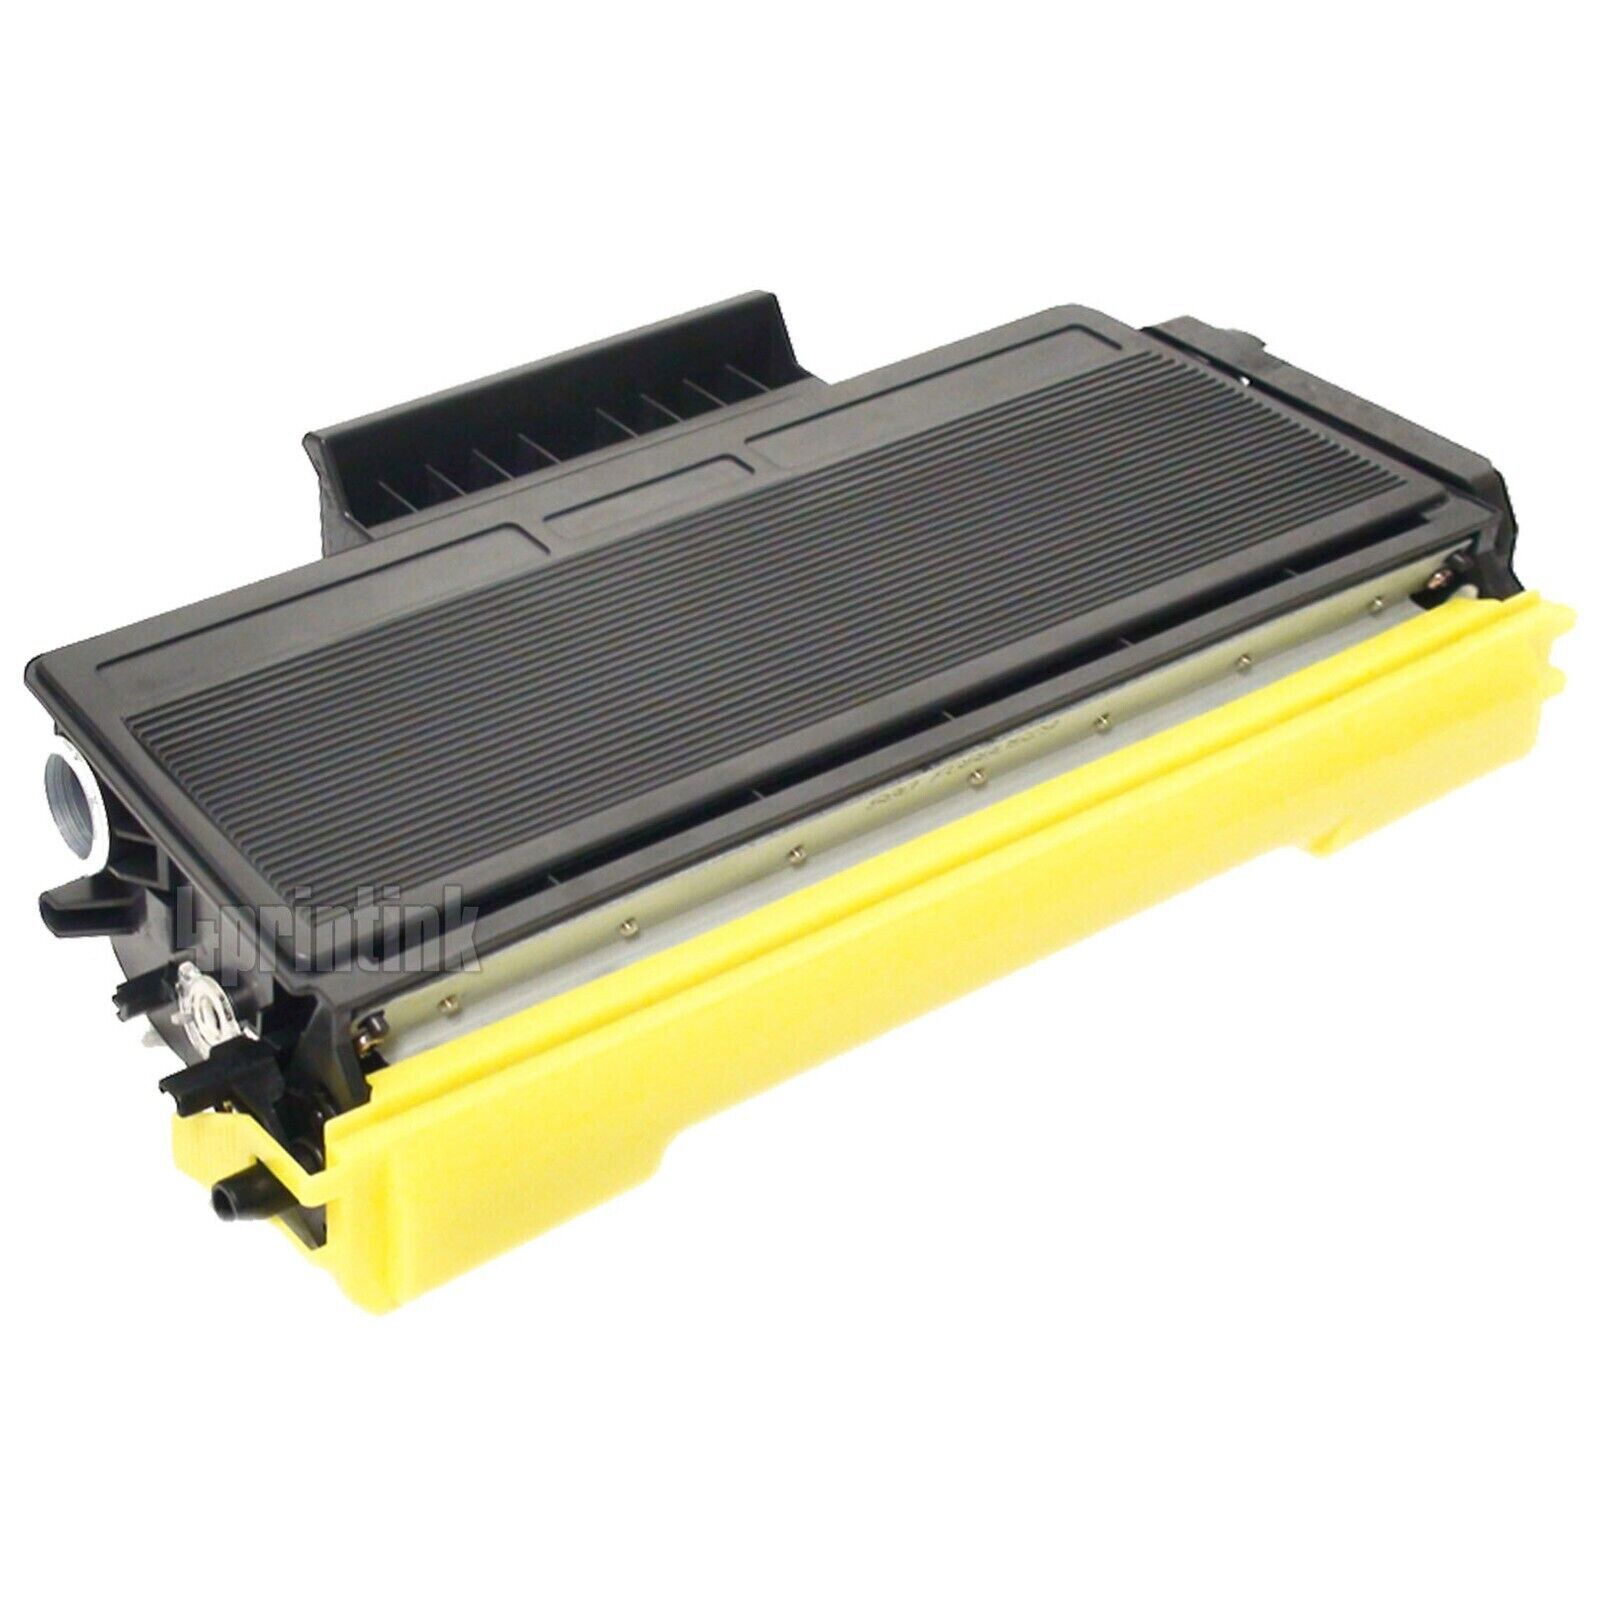 TN650 Toner For Brother TN-650 MFC-8480DN, MFC-8680DN, MFC-8690DW, MFC-8890DW